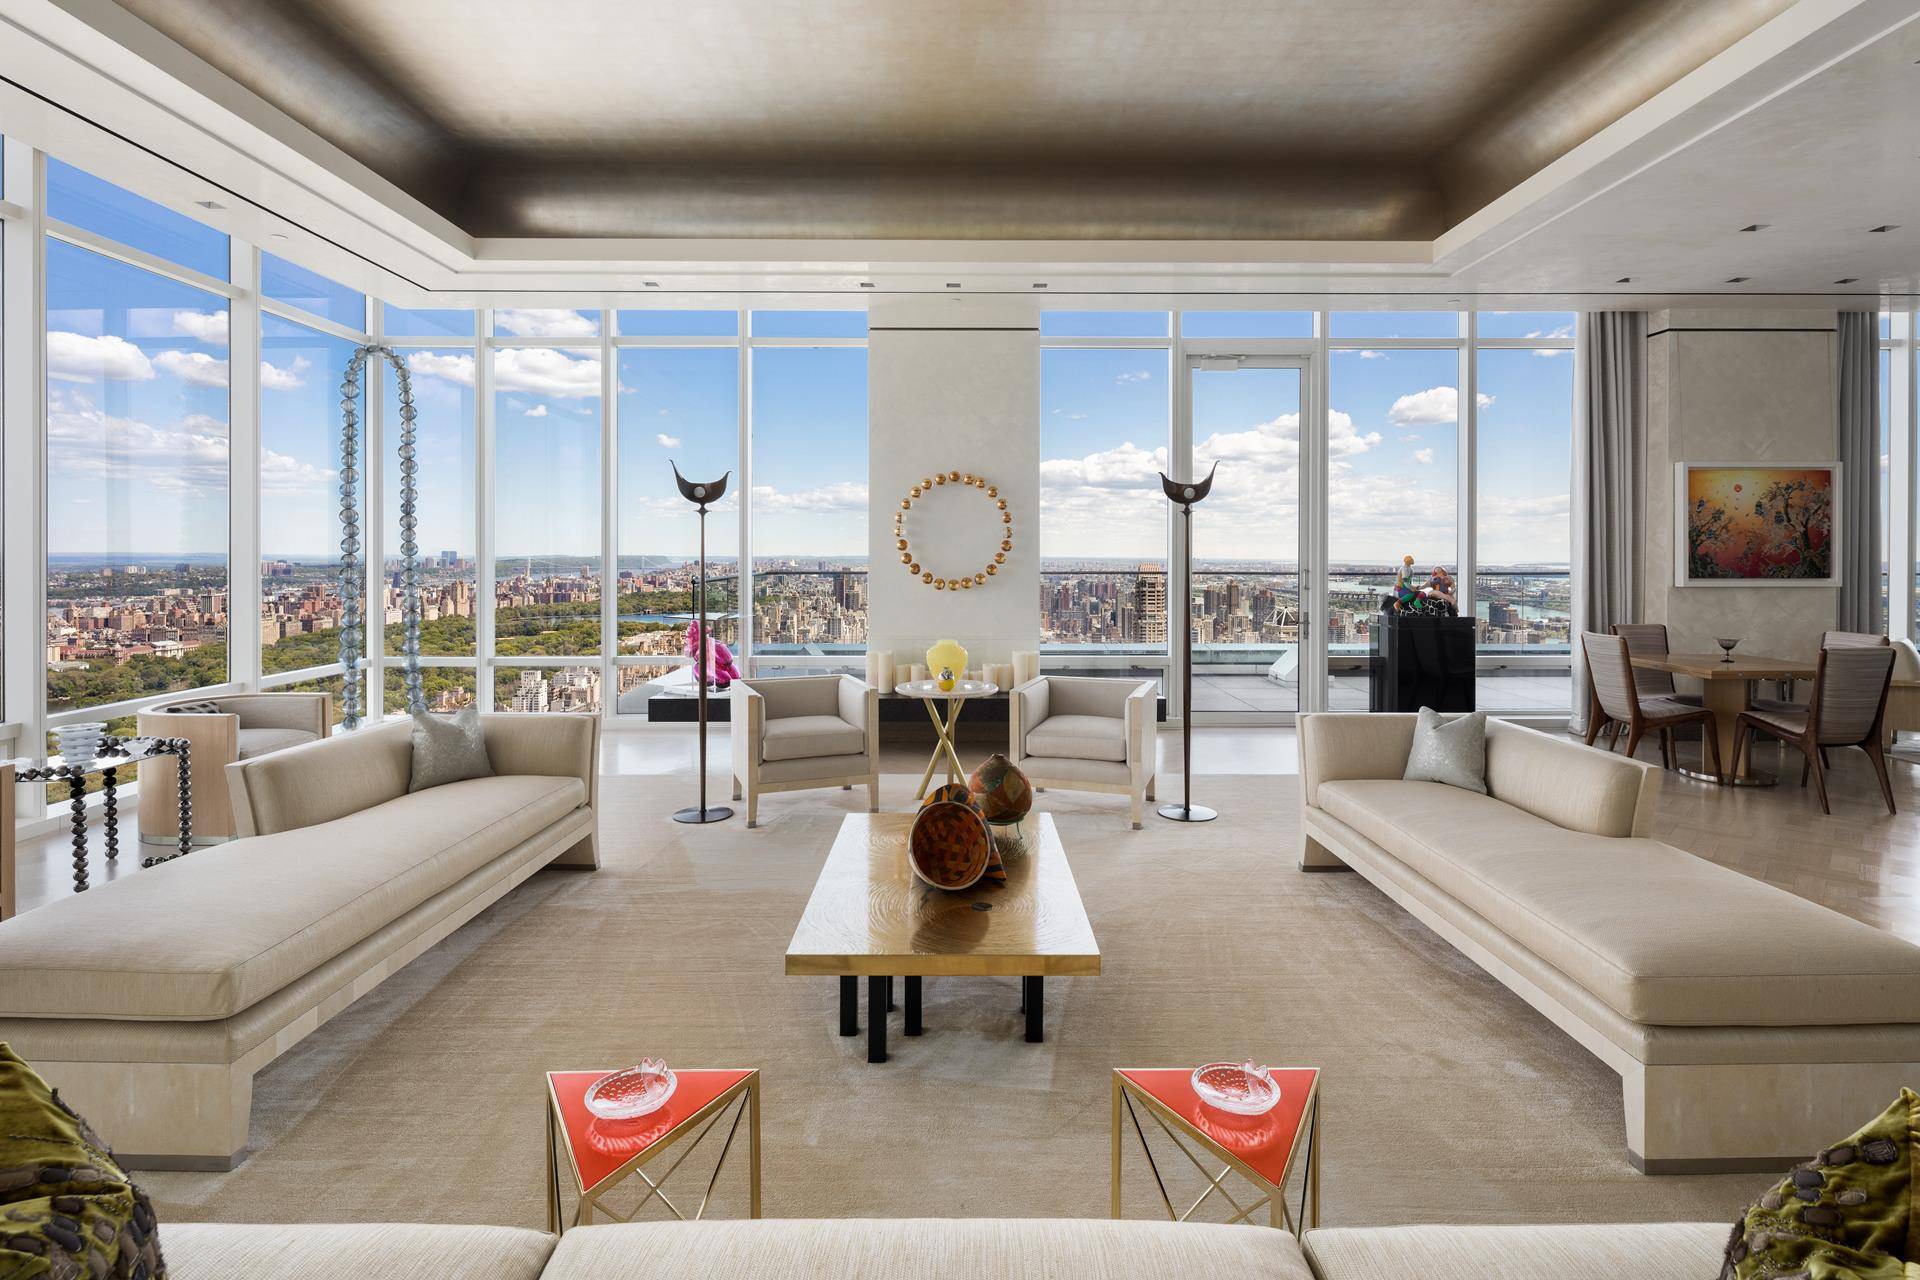 Penthouse 50 in One Beacon Court Welcome to the most magnificent uptown condominium residence with the grandest scale of any apartment on 1 floor over 9, 500 square feet plus ...